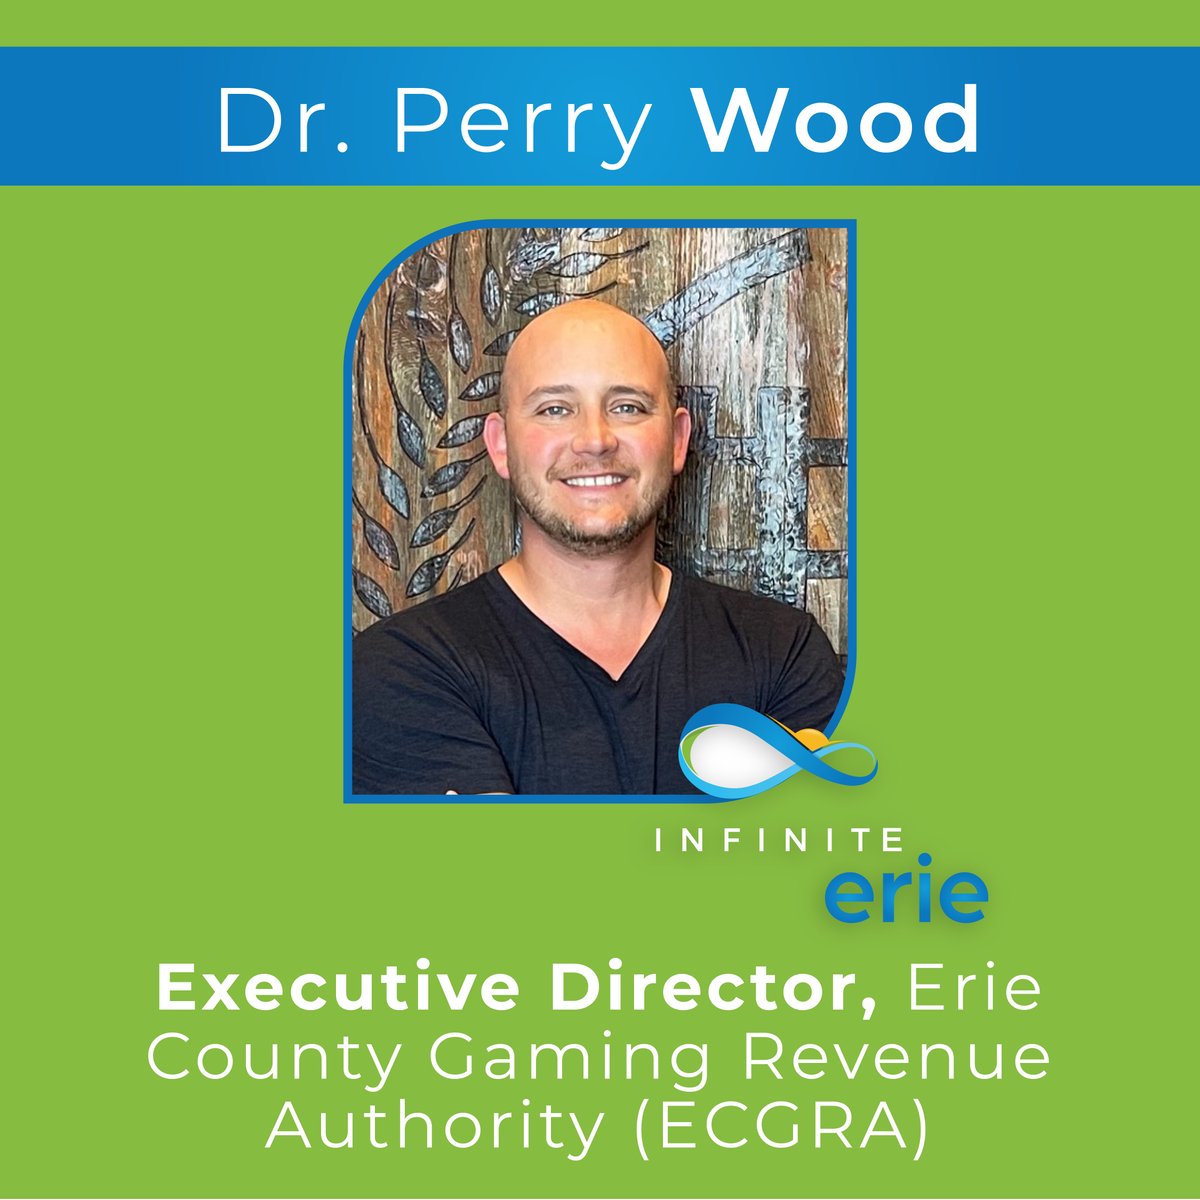 #TeamFriday Introducing Perry Wood, member of the #ErieActionTeam!

Catalyzing #InfiniteGrowth, he serves as the Executive Director at ECGRA — fueling economic and community development.

#InfiniteErie #InvestmentPlaybook #WePutPlansIntoAction #EriePA
infiniteerie.com